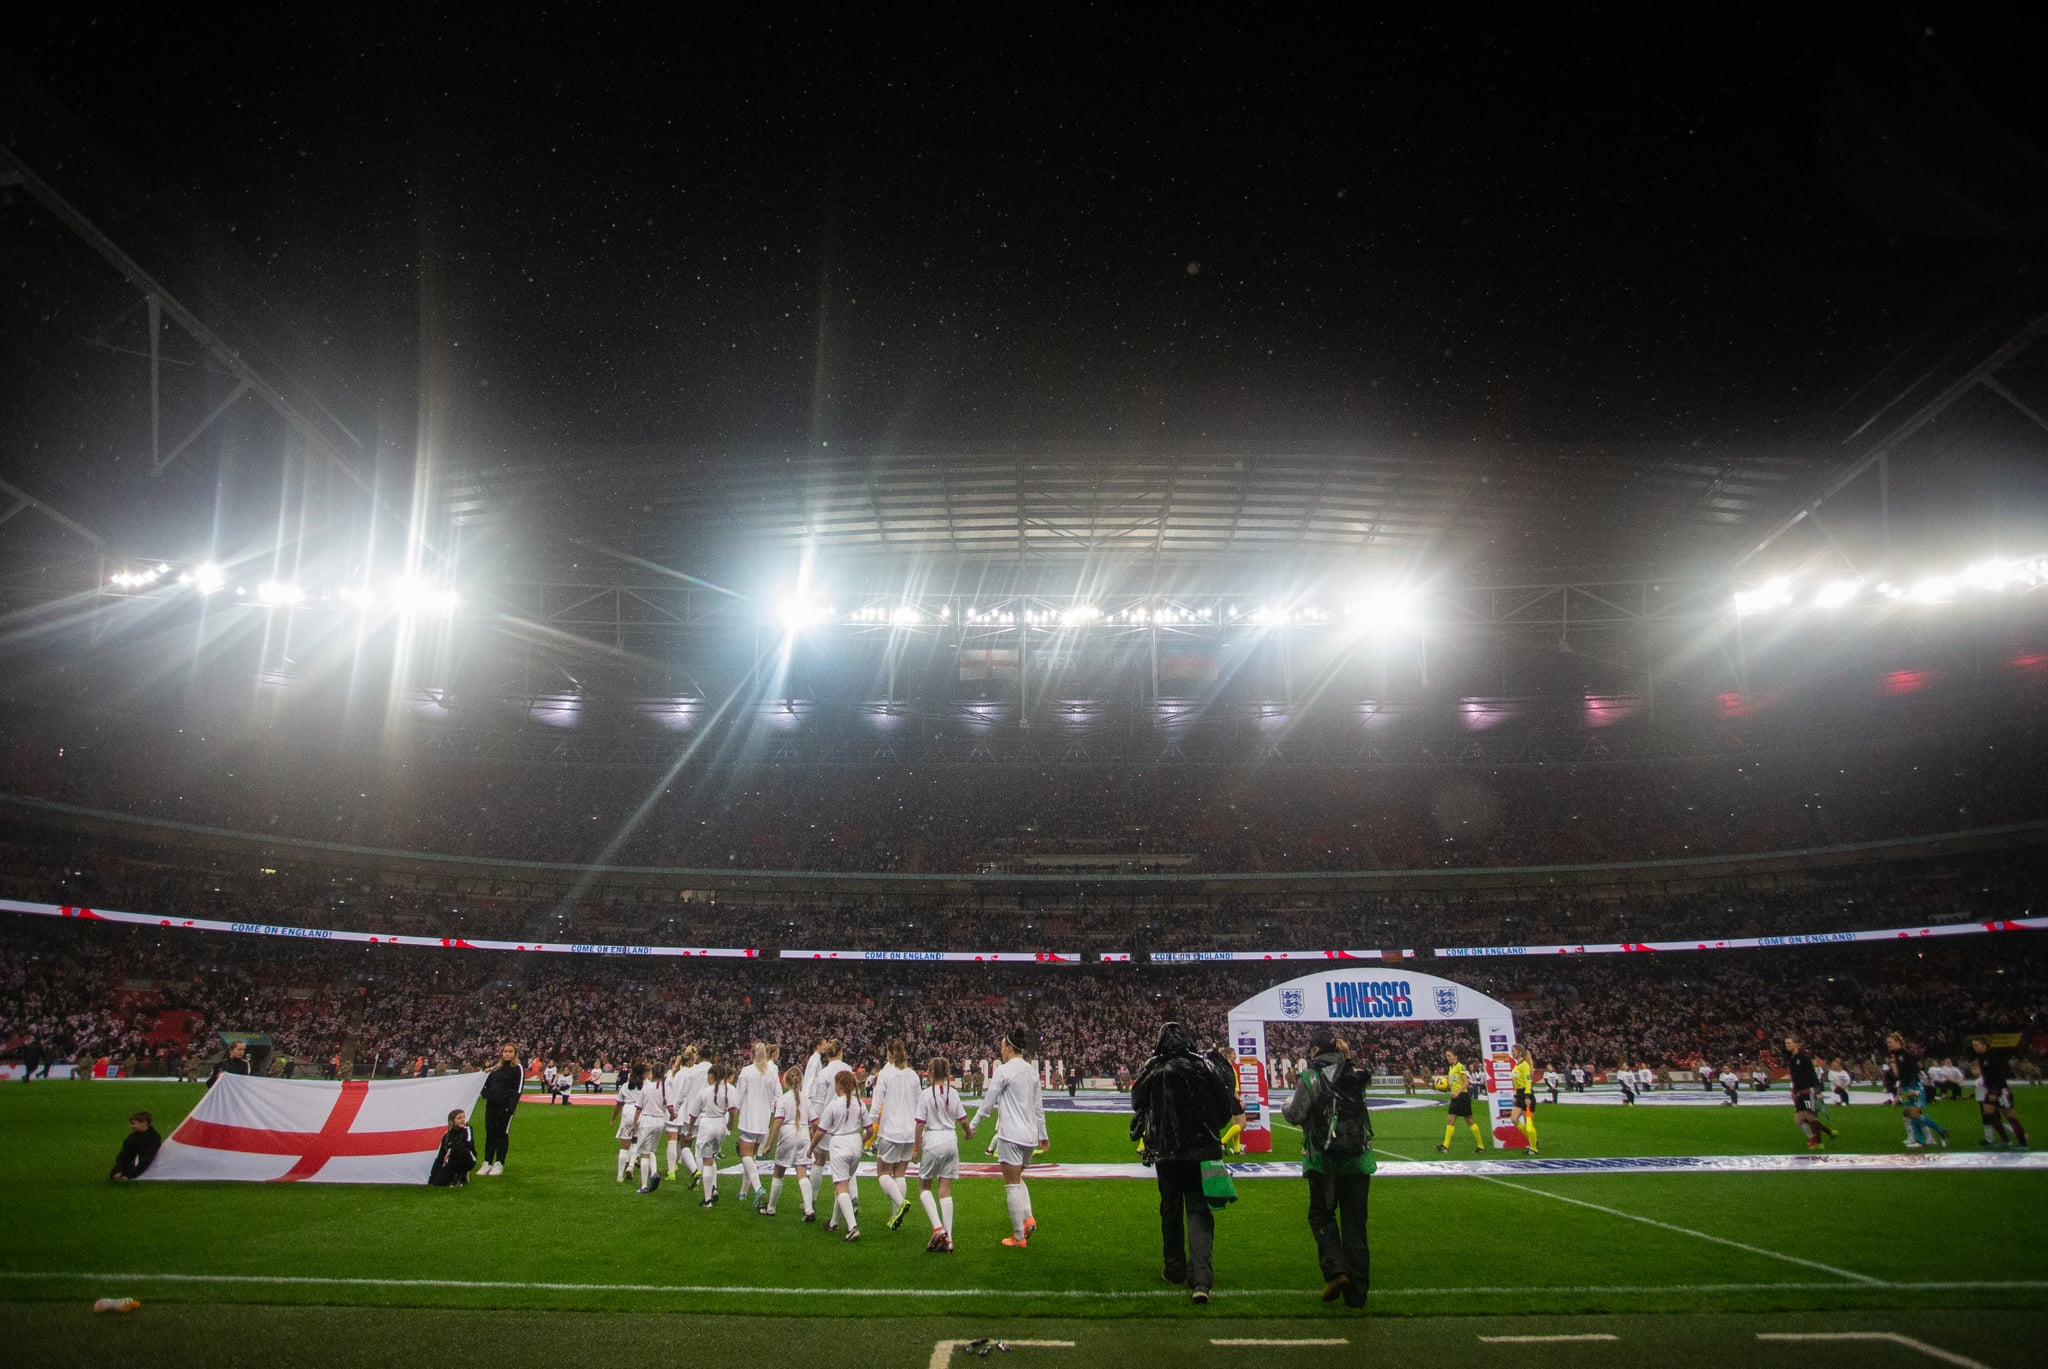 The England Team walk on to the pitch with their player escorts for the singing of the national anthems before kick-off England v Germany Women's International Friendlies football match, Wembley Stadium, London, UK - 09 Nov 2019Photo: Chloe Knott for The FA